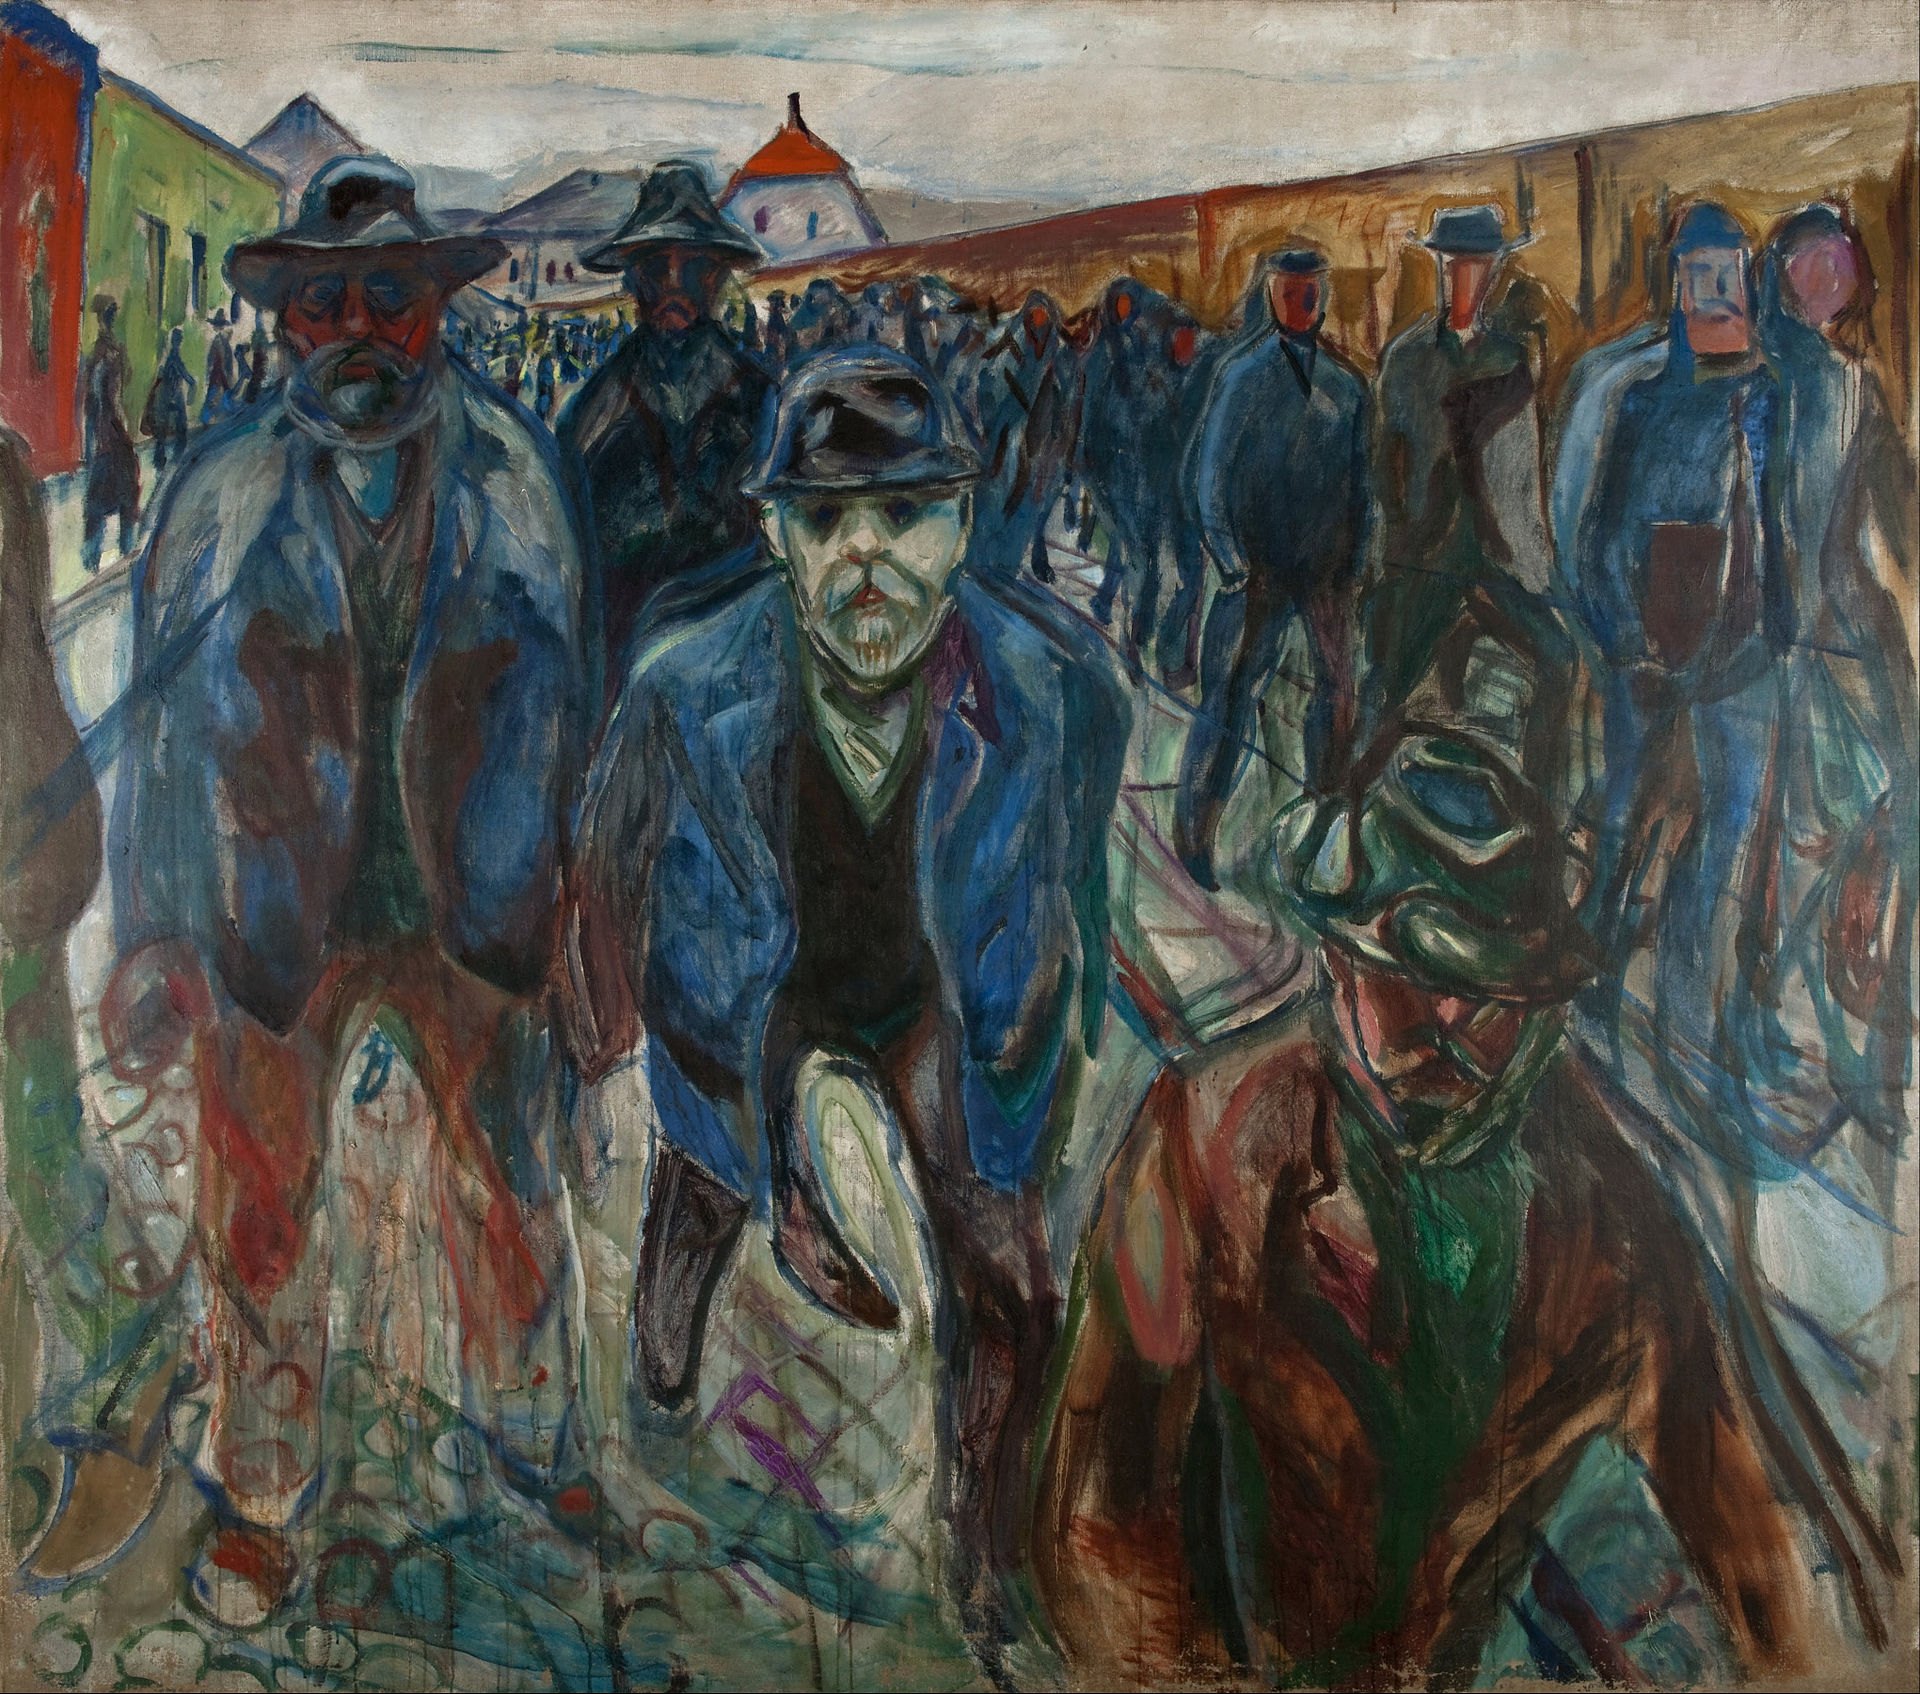 Workers on their Way Home, 1913–14